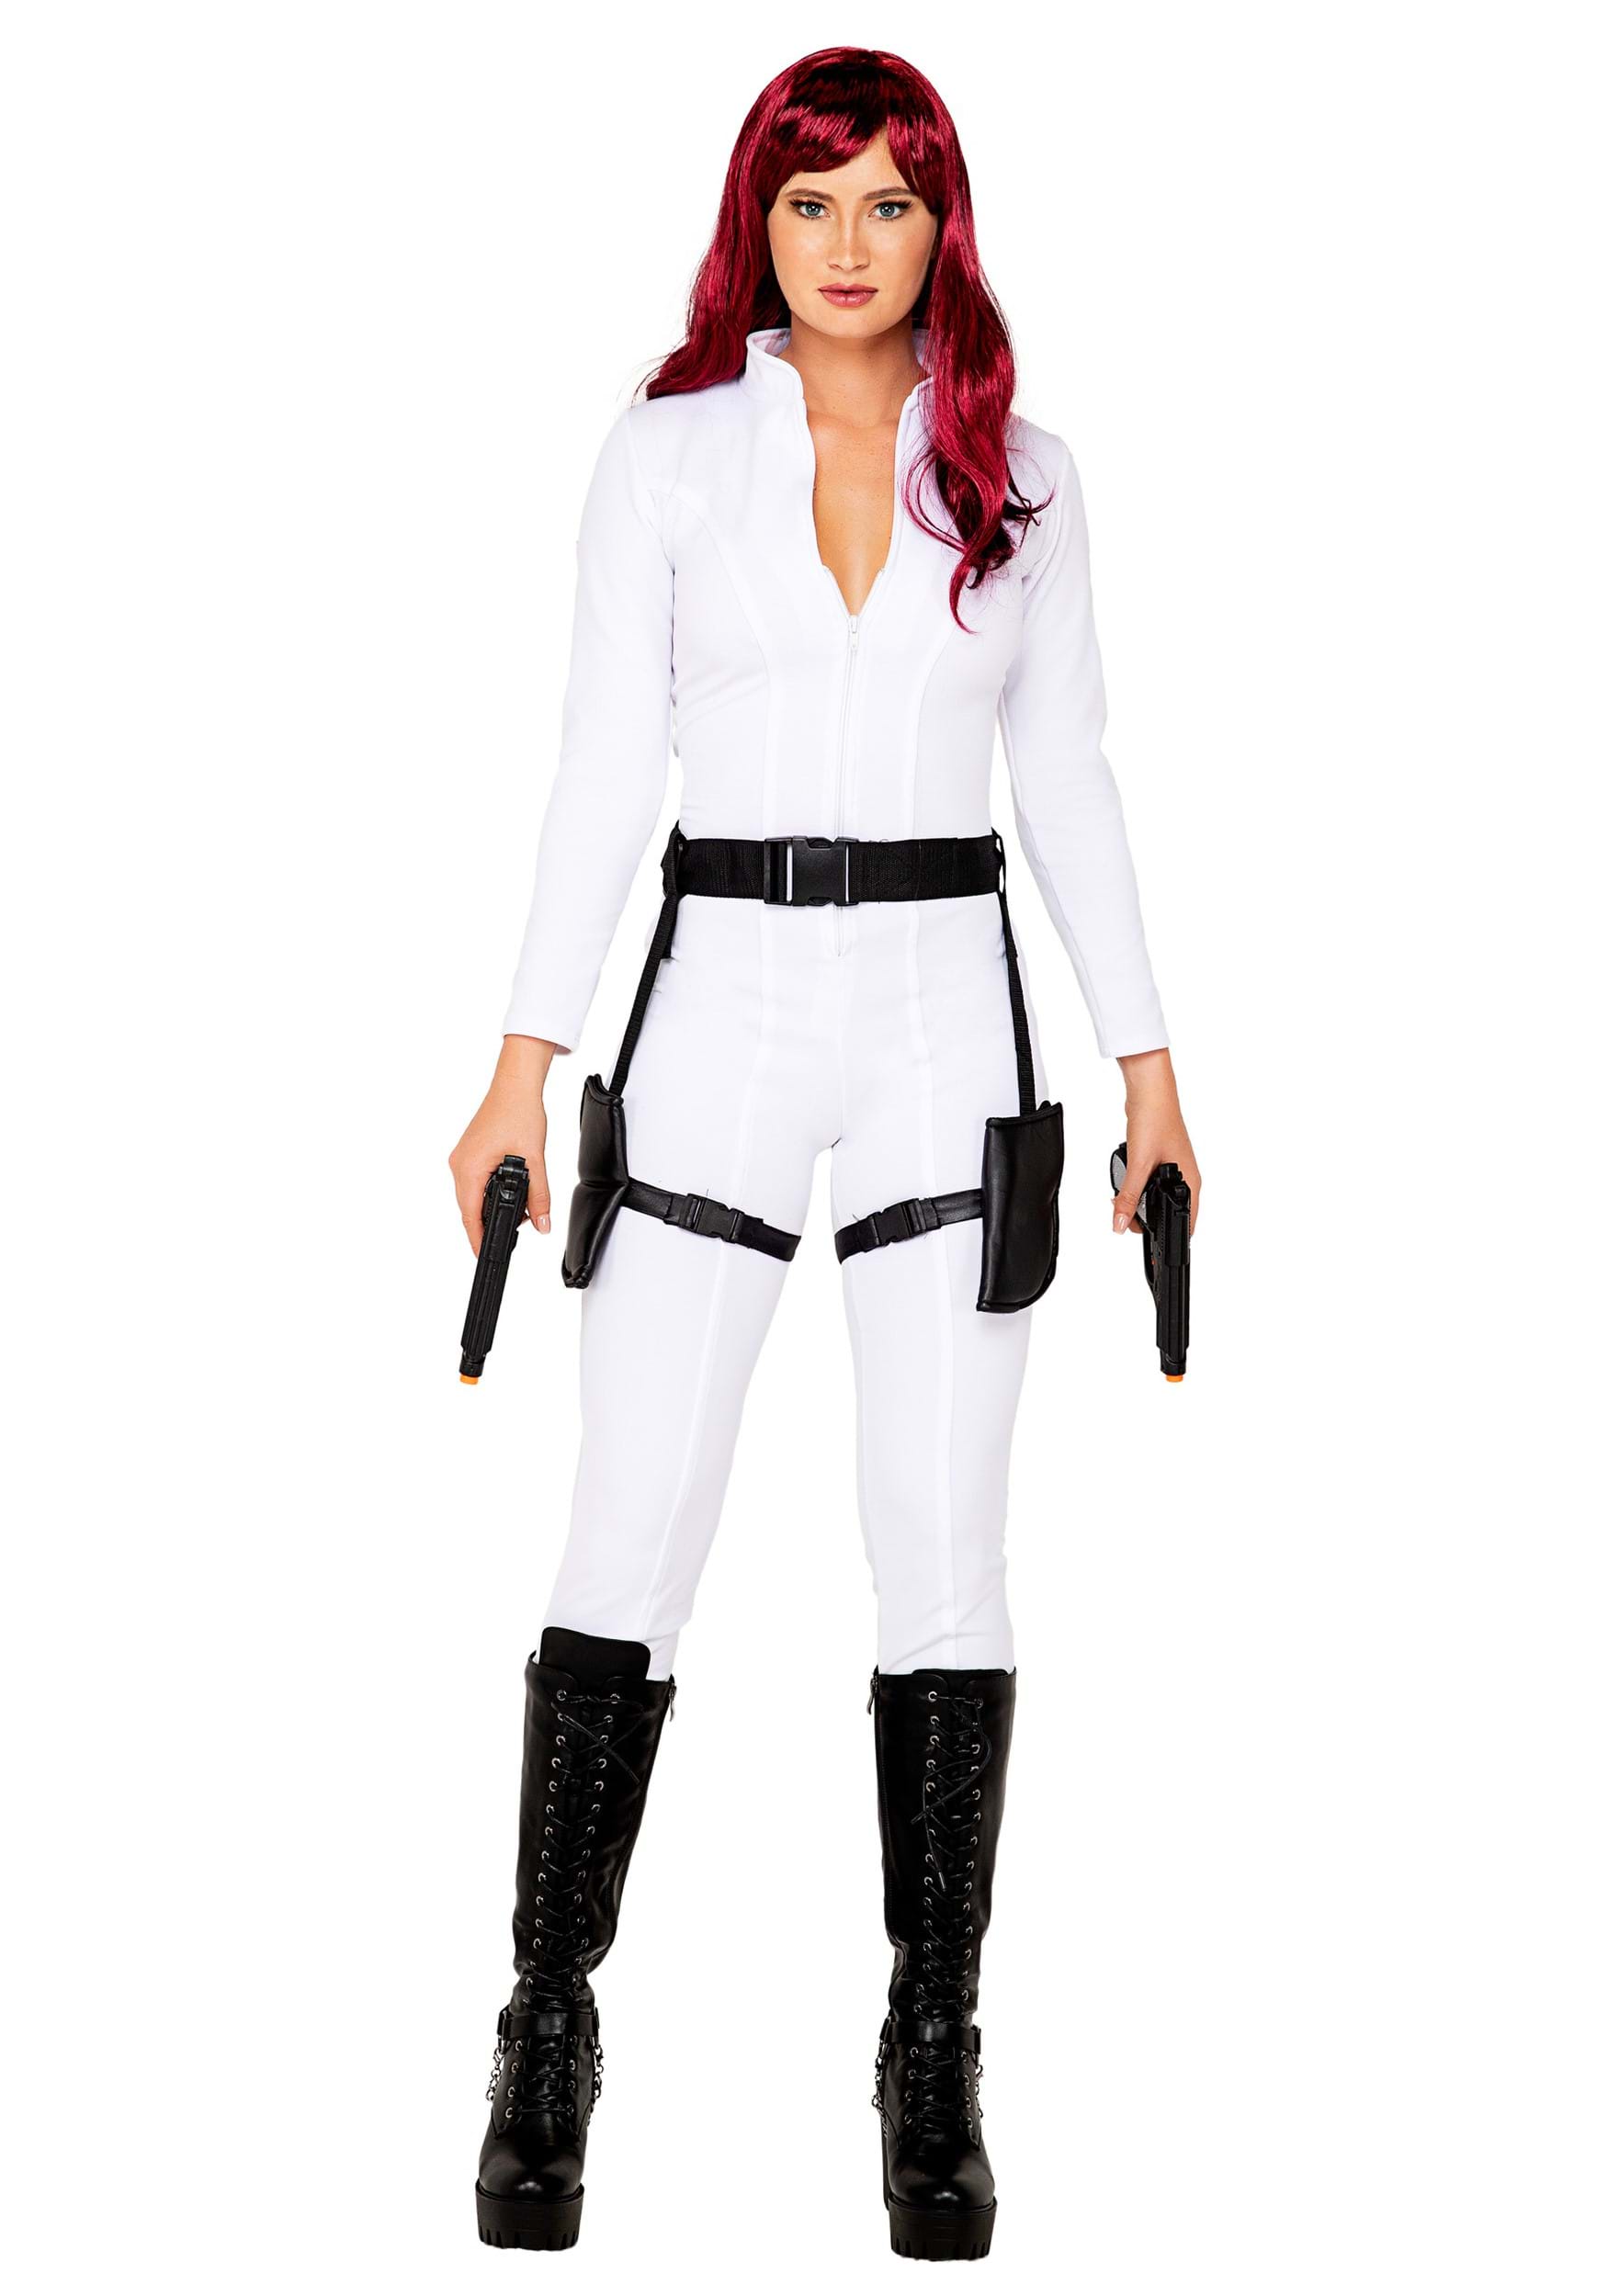 Image of Black Ops Spy Costume for Women ID RO5093-M